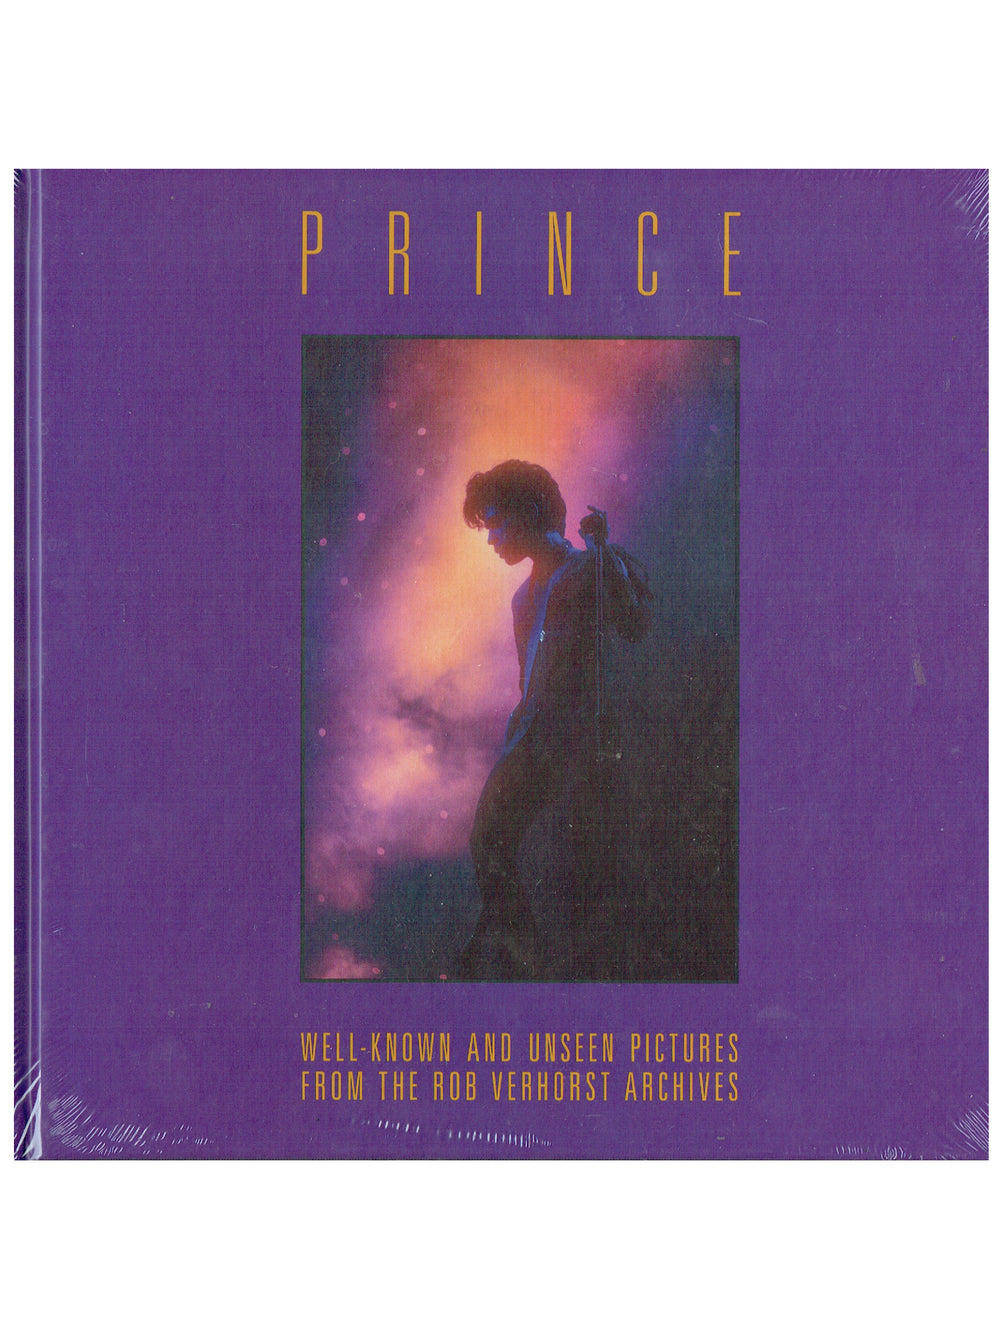 Prince – Pictures By Rob Verhorst Hardbacked Book  IN STOCK VERY LIMITED